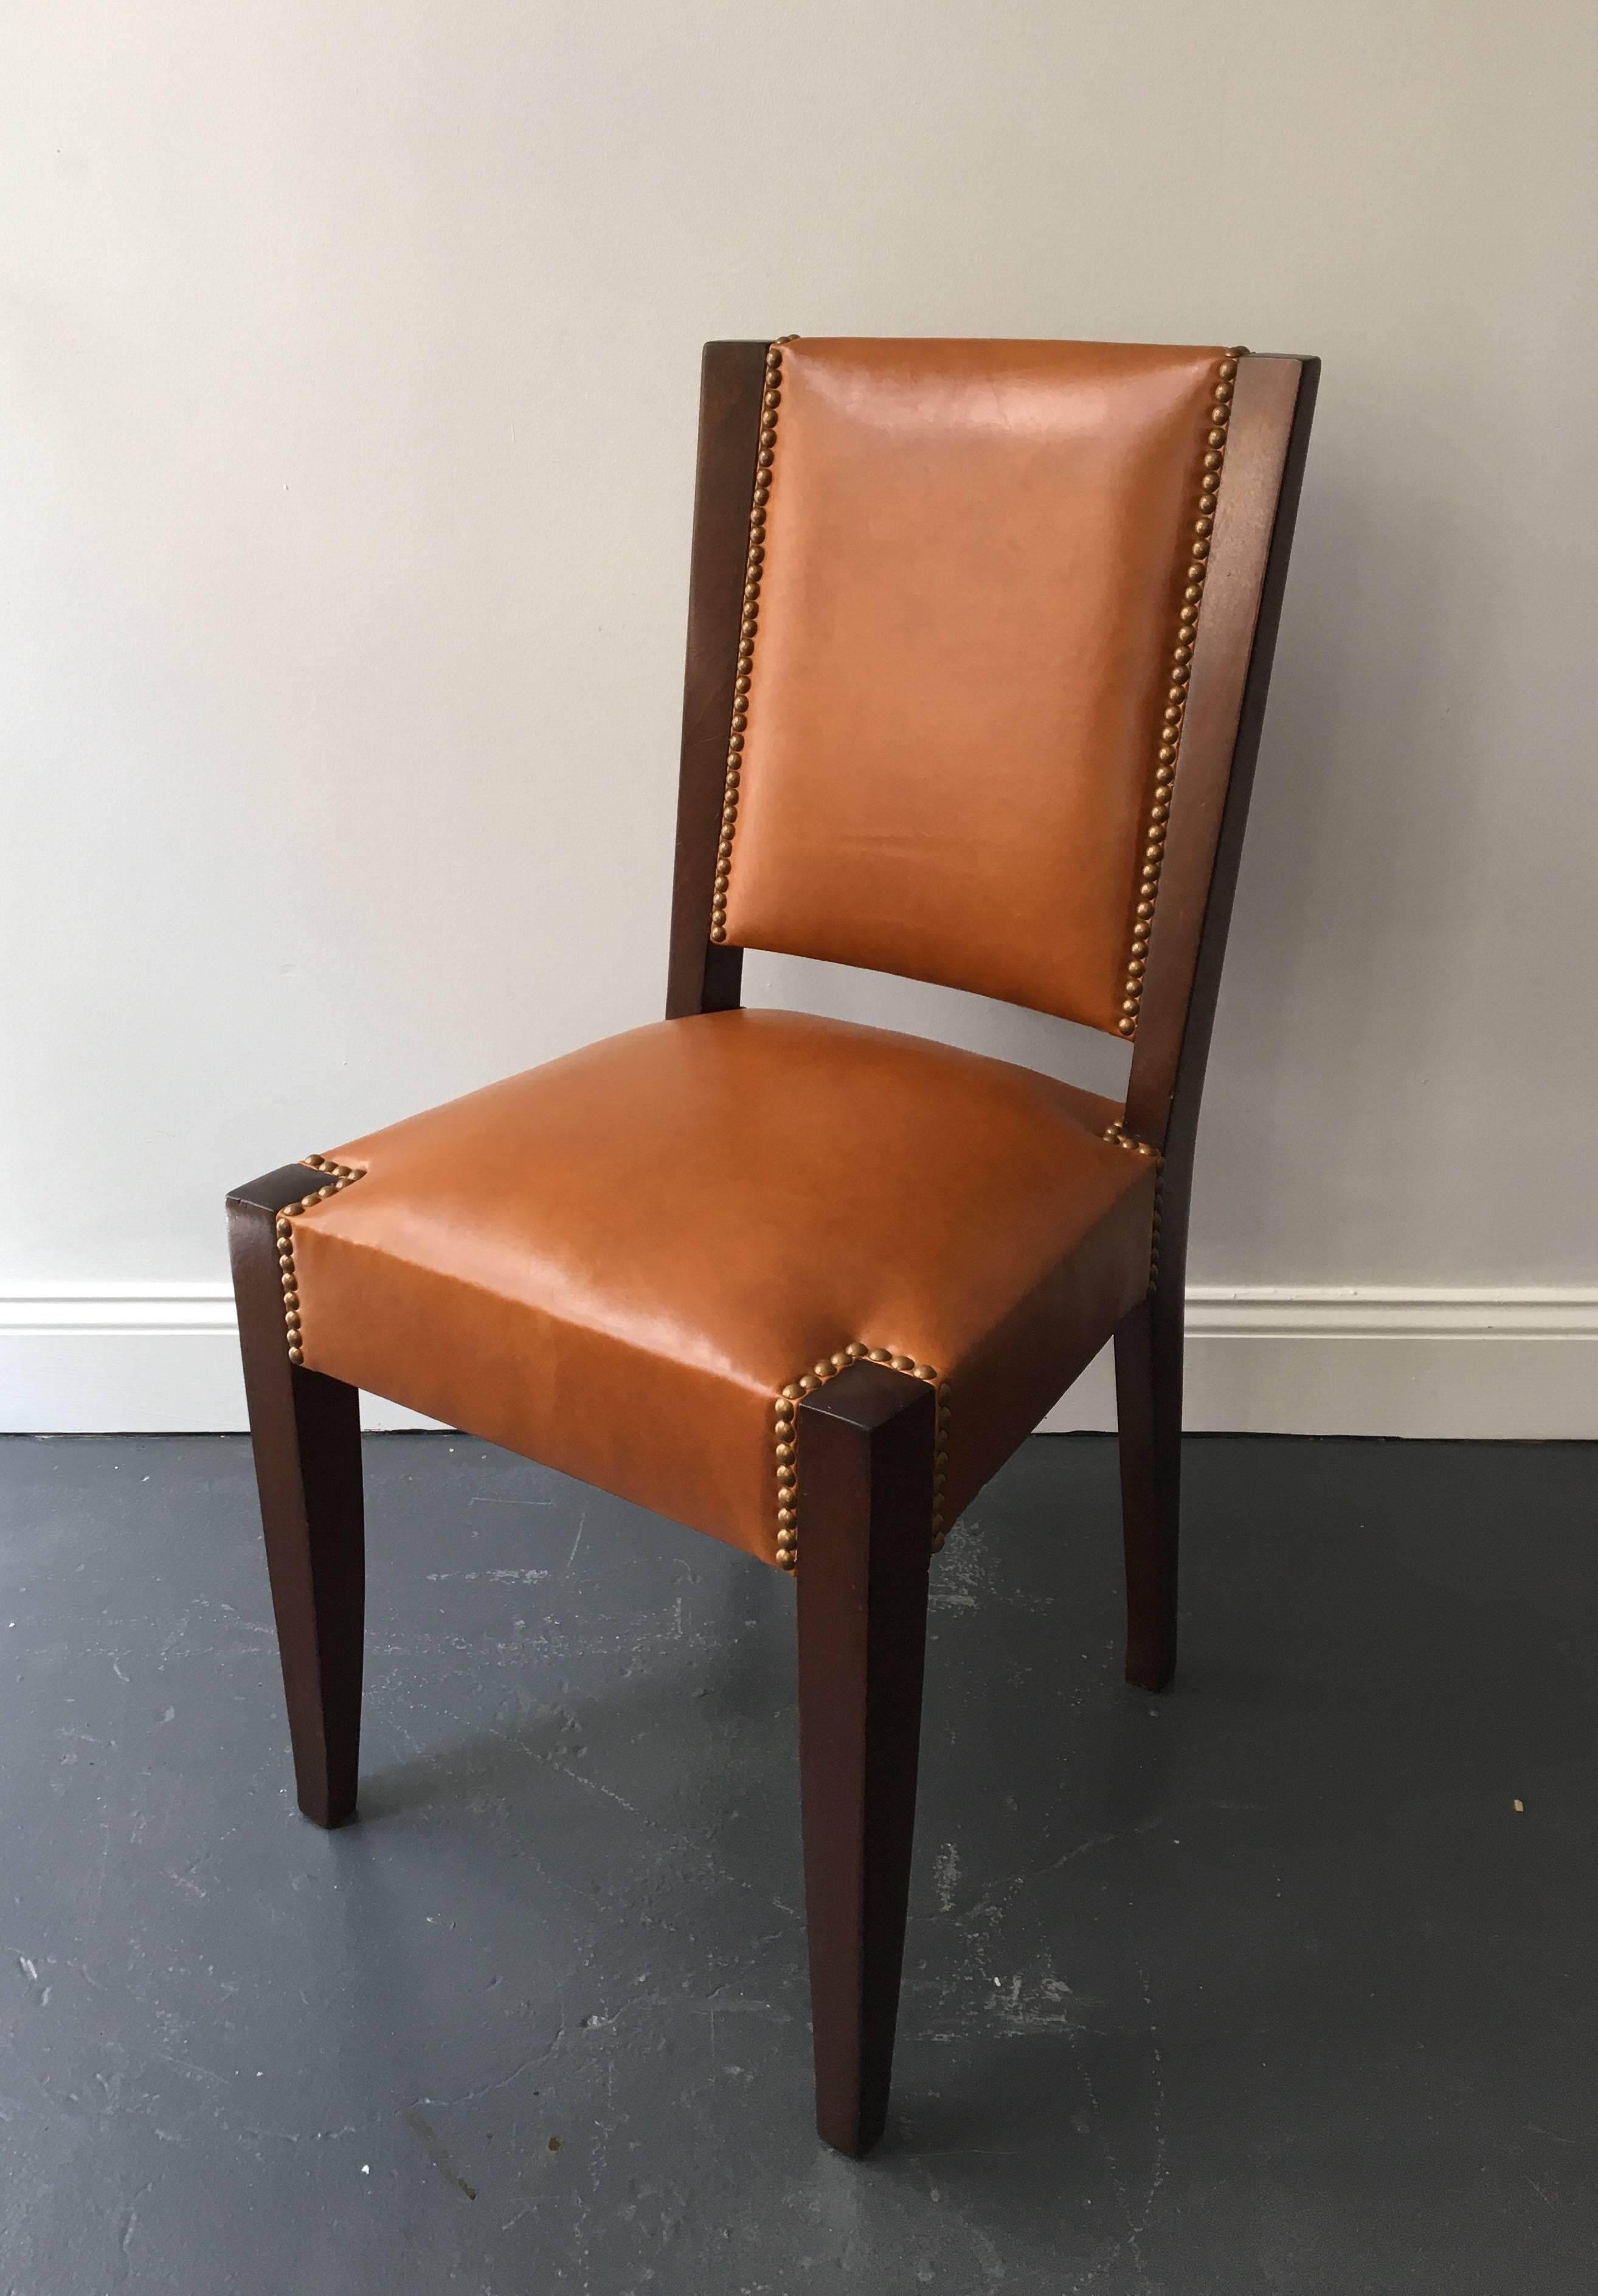 Set of two mahogany desk or dining chairs.